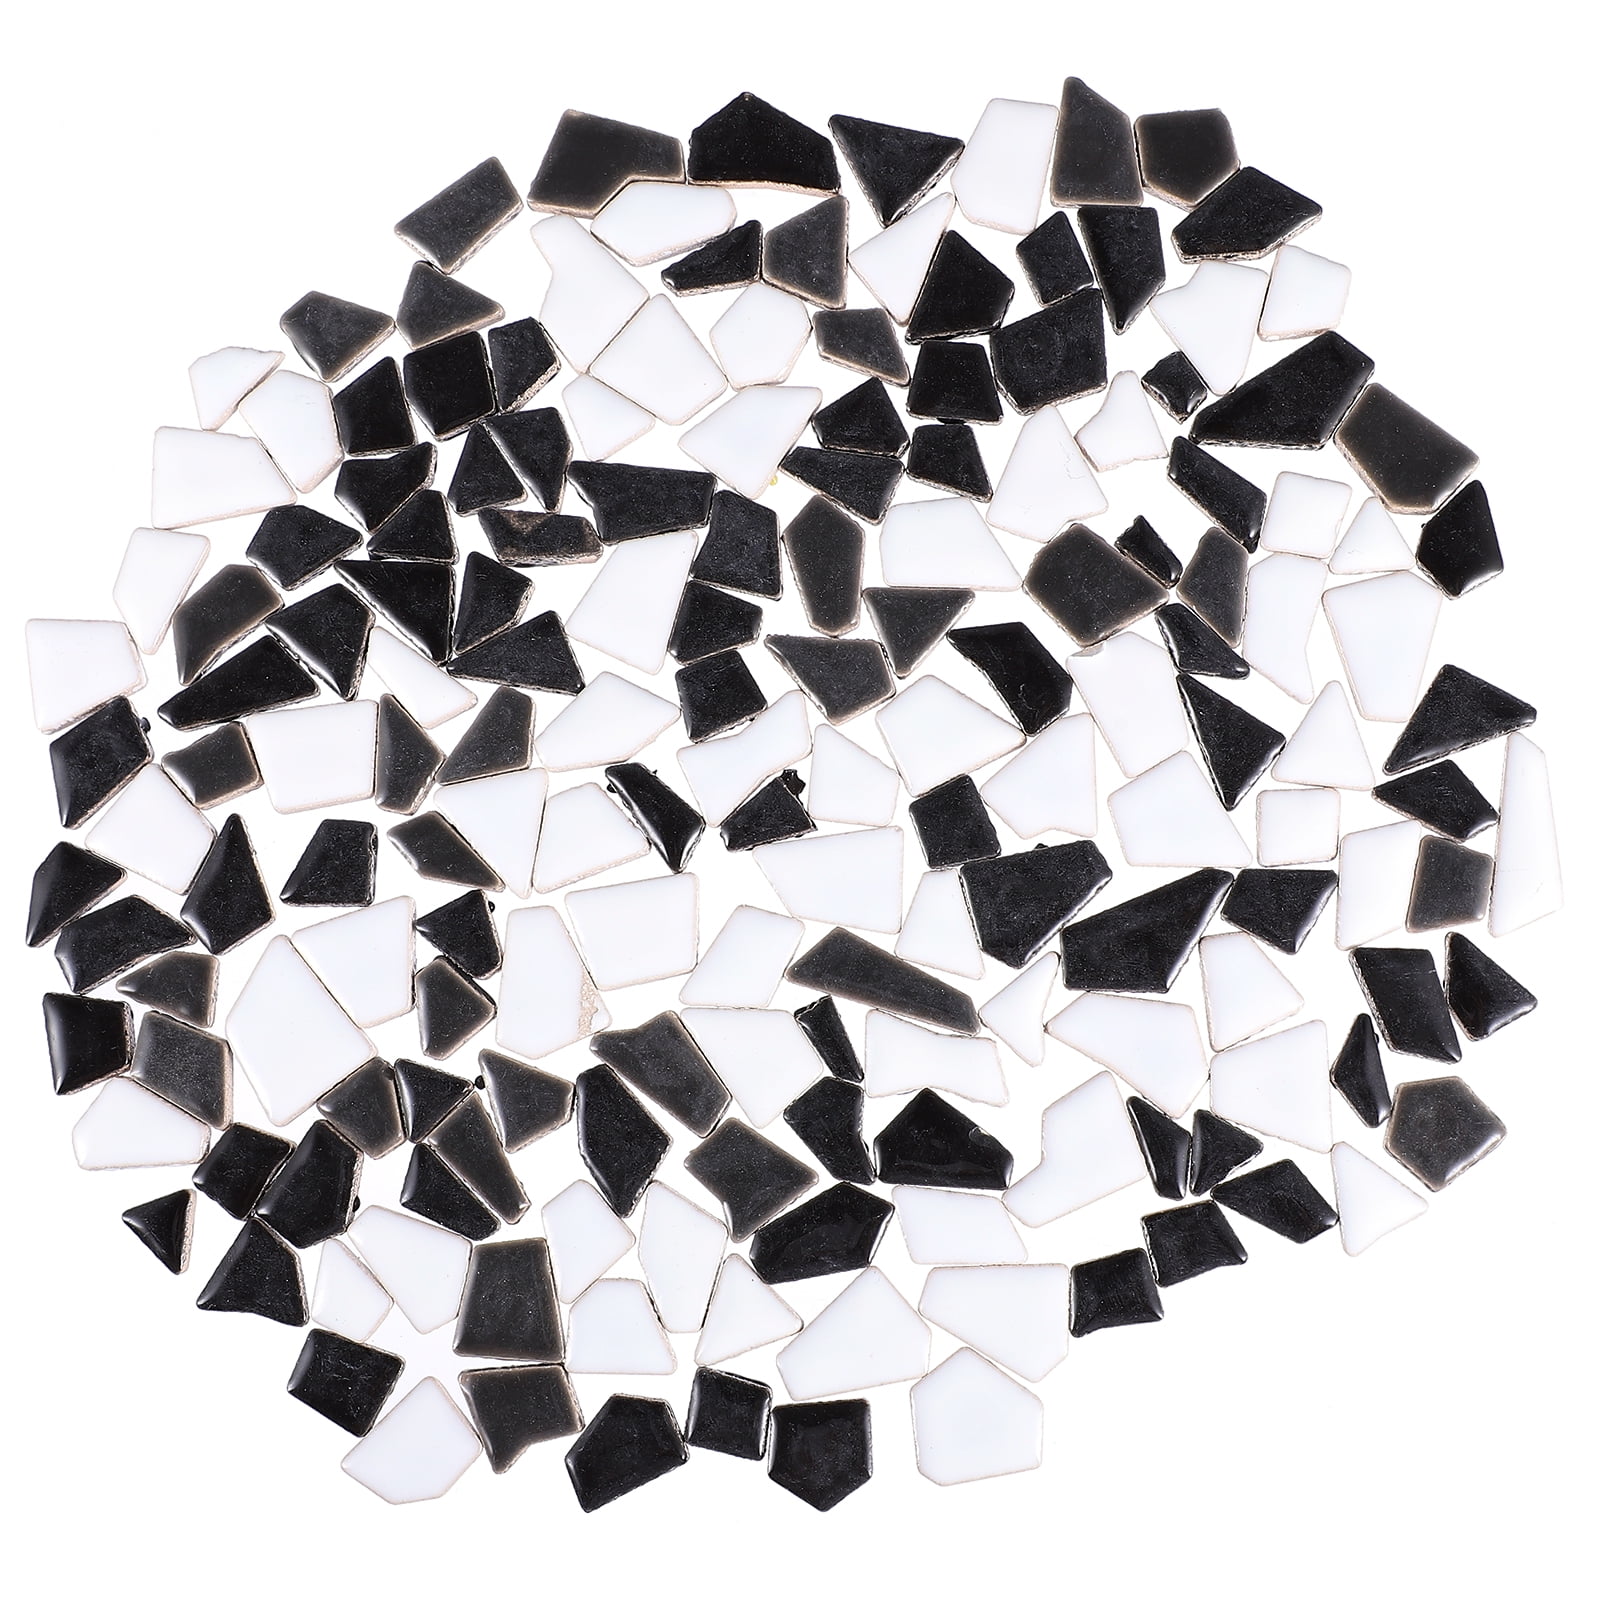 50 Pieces Black Mosaic Tiles for Crafts 1 Ceramic Tiles Assorted Colors  Square Ceramic Mosaic Project Supplies for Photo Frame Mosaic Stepping  Stones